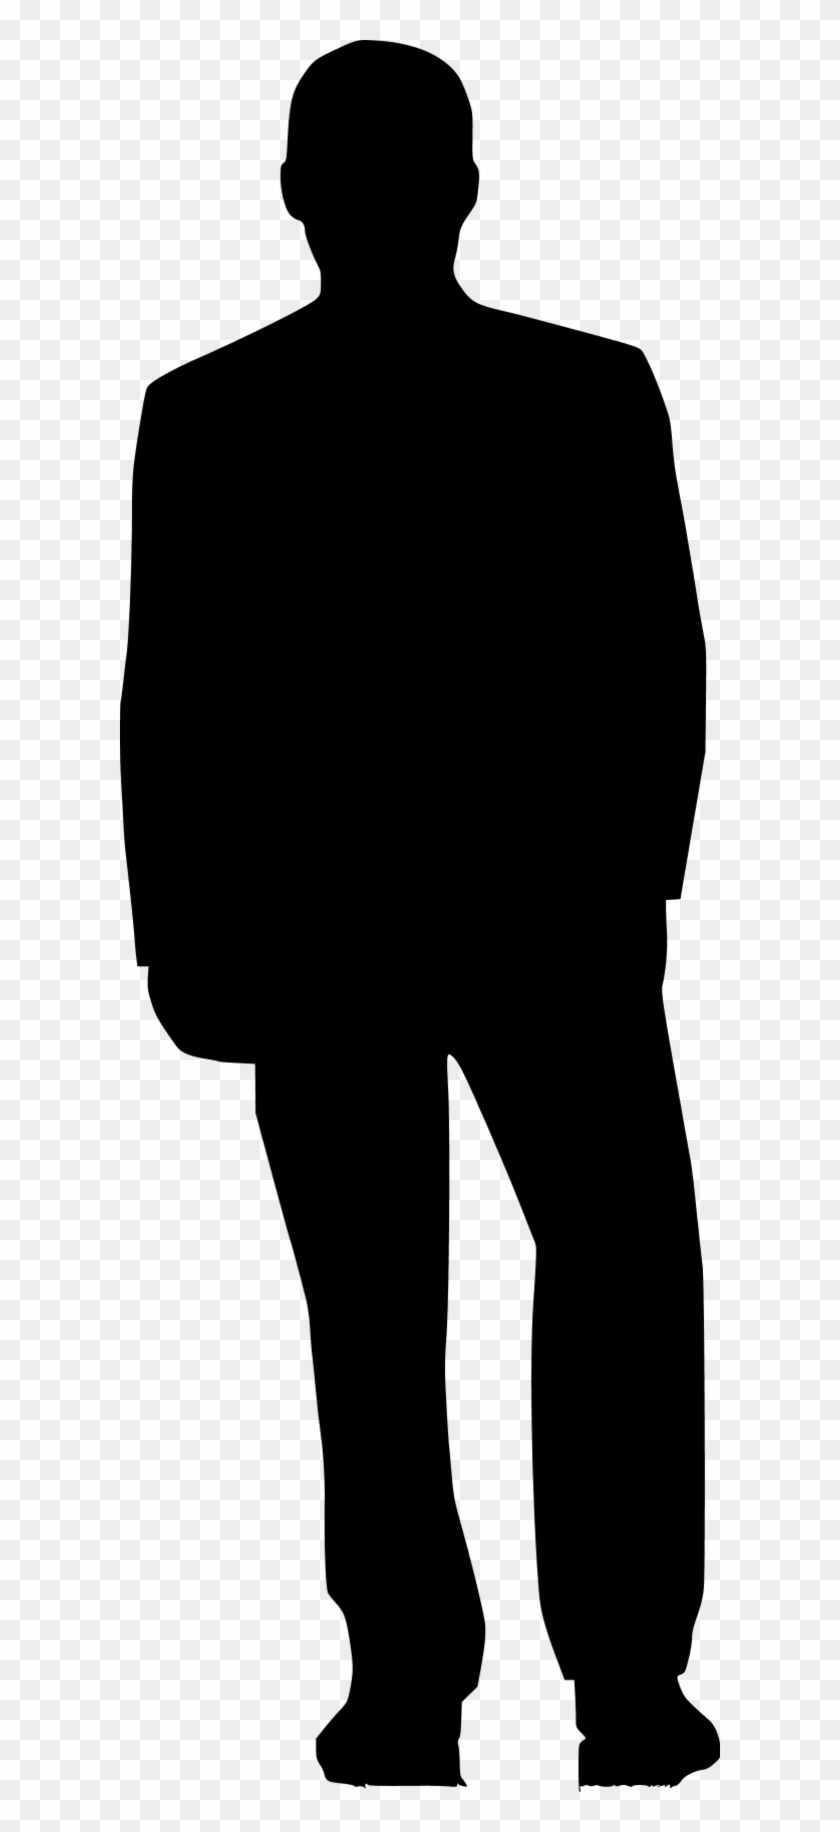 600 X 1752 3 0 - People Silhouette Back Png Clipart #5656405